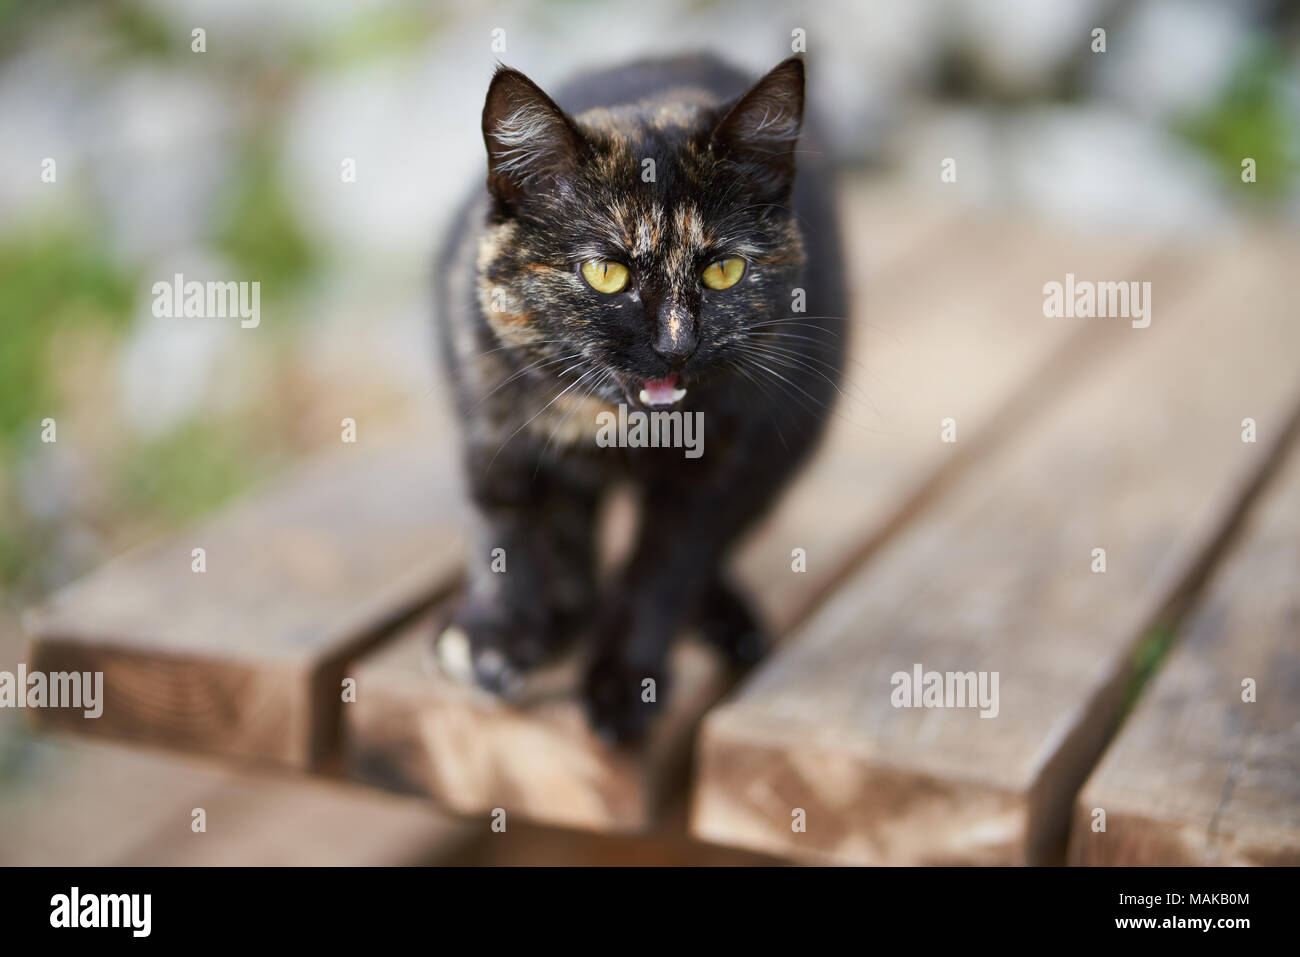 Shallow depth of field portraiture of wild black calico cat or tortoiseshell cat with colored patches. Stock Photo